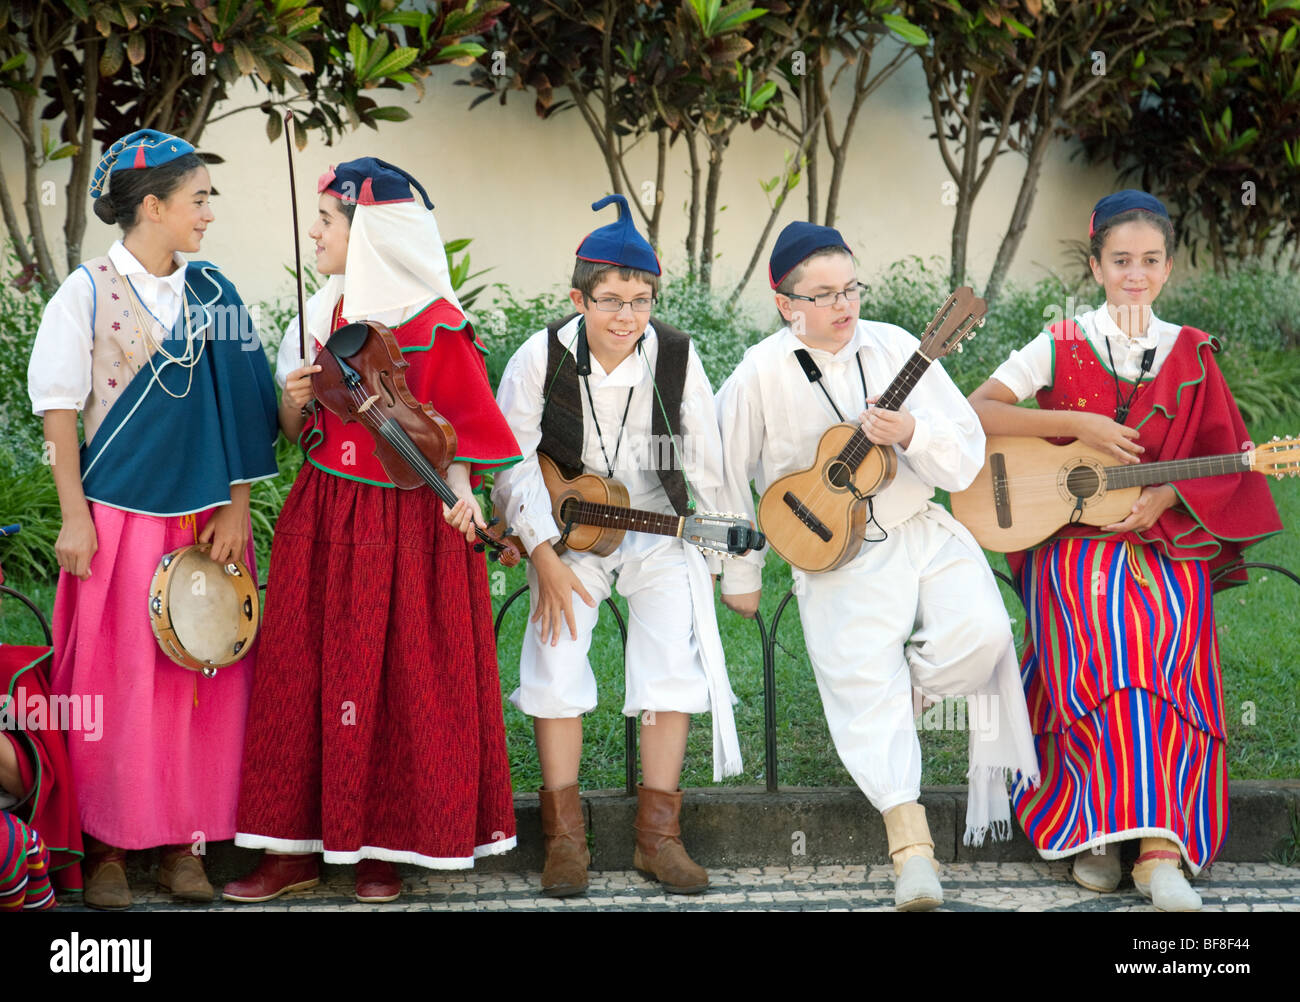 Madeiran children in traditional costume playing musical instruments and dancing, Funchal, madeira Stock Photo